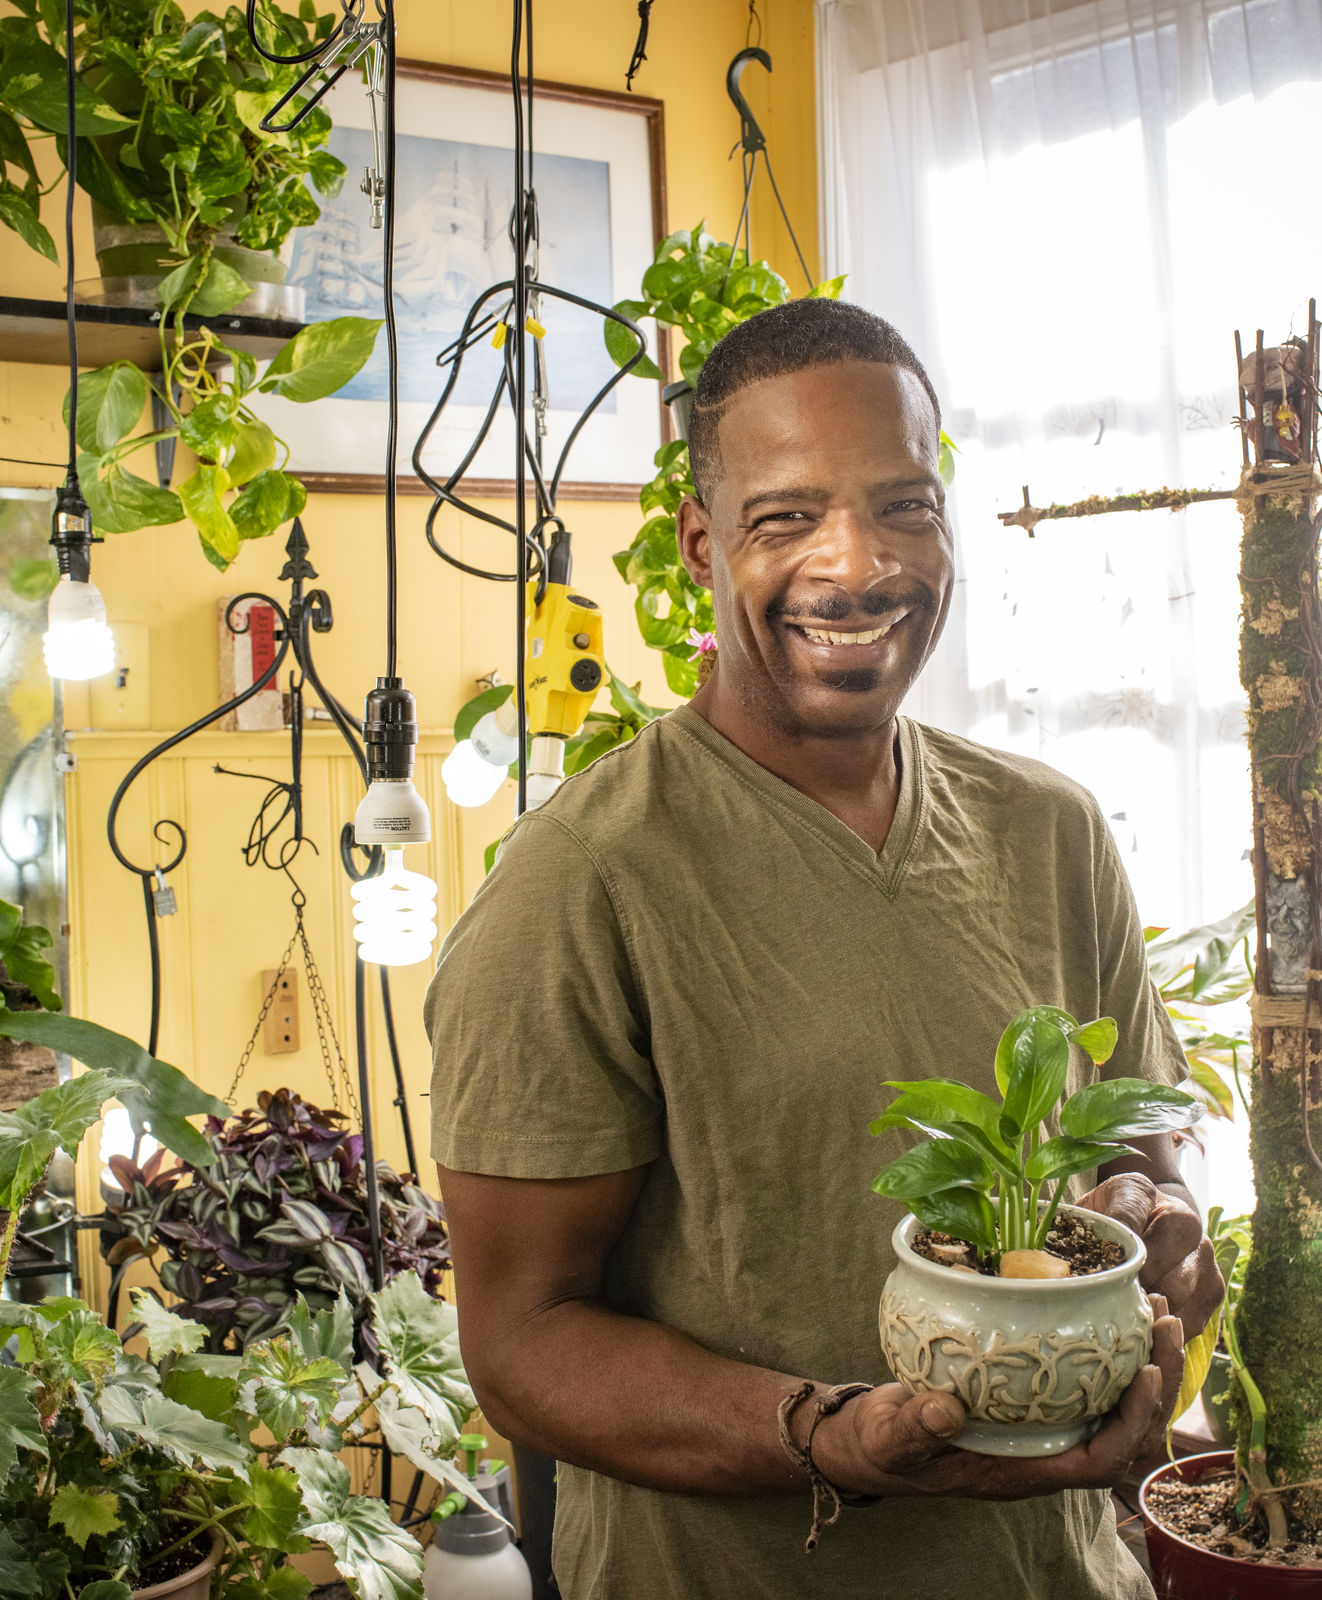 Man indoors holding a potted plants among many potted plants